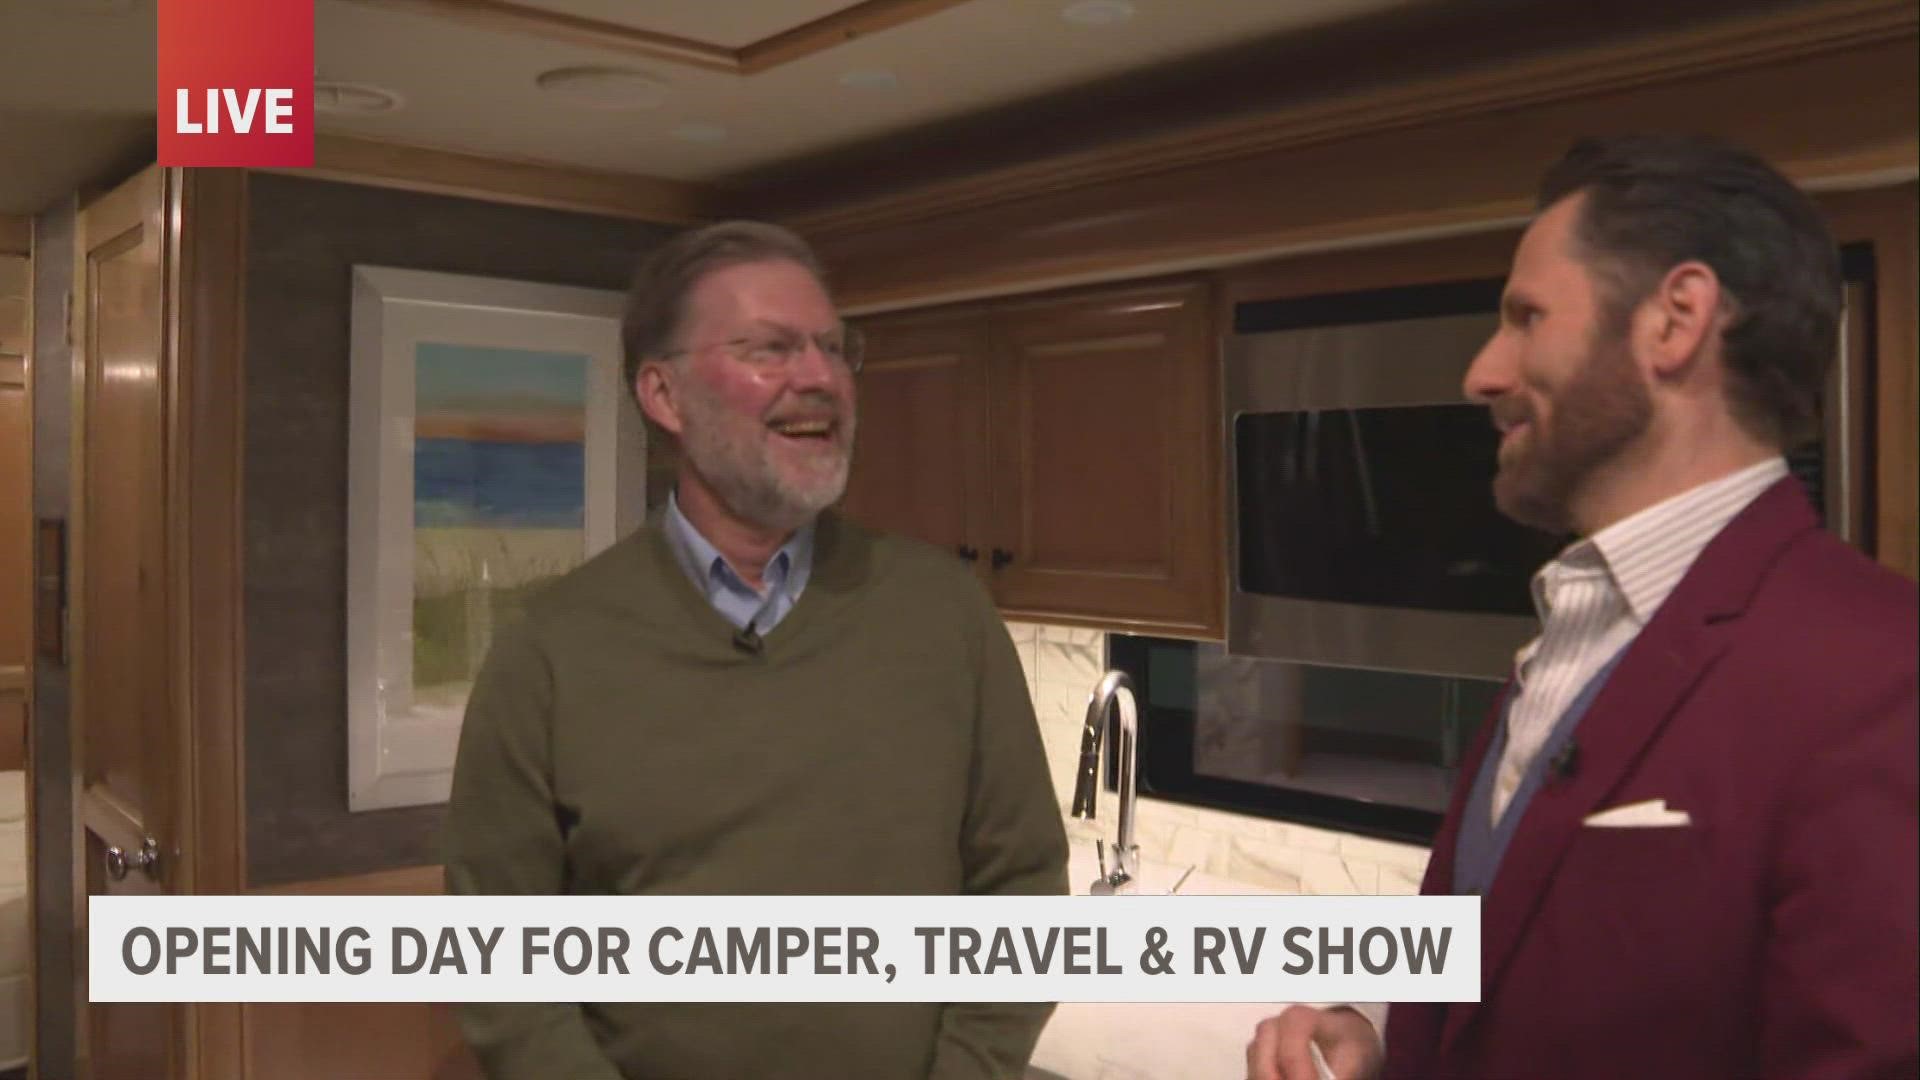 Visitors can see 100 RV lines from a dozen dealers, as well as accessories and camping necessities.